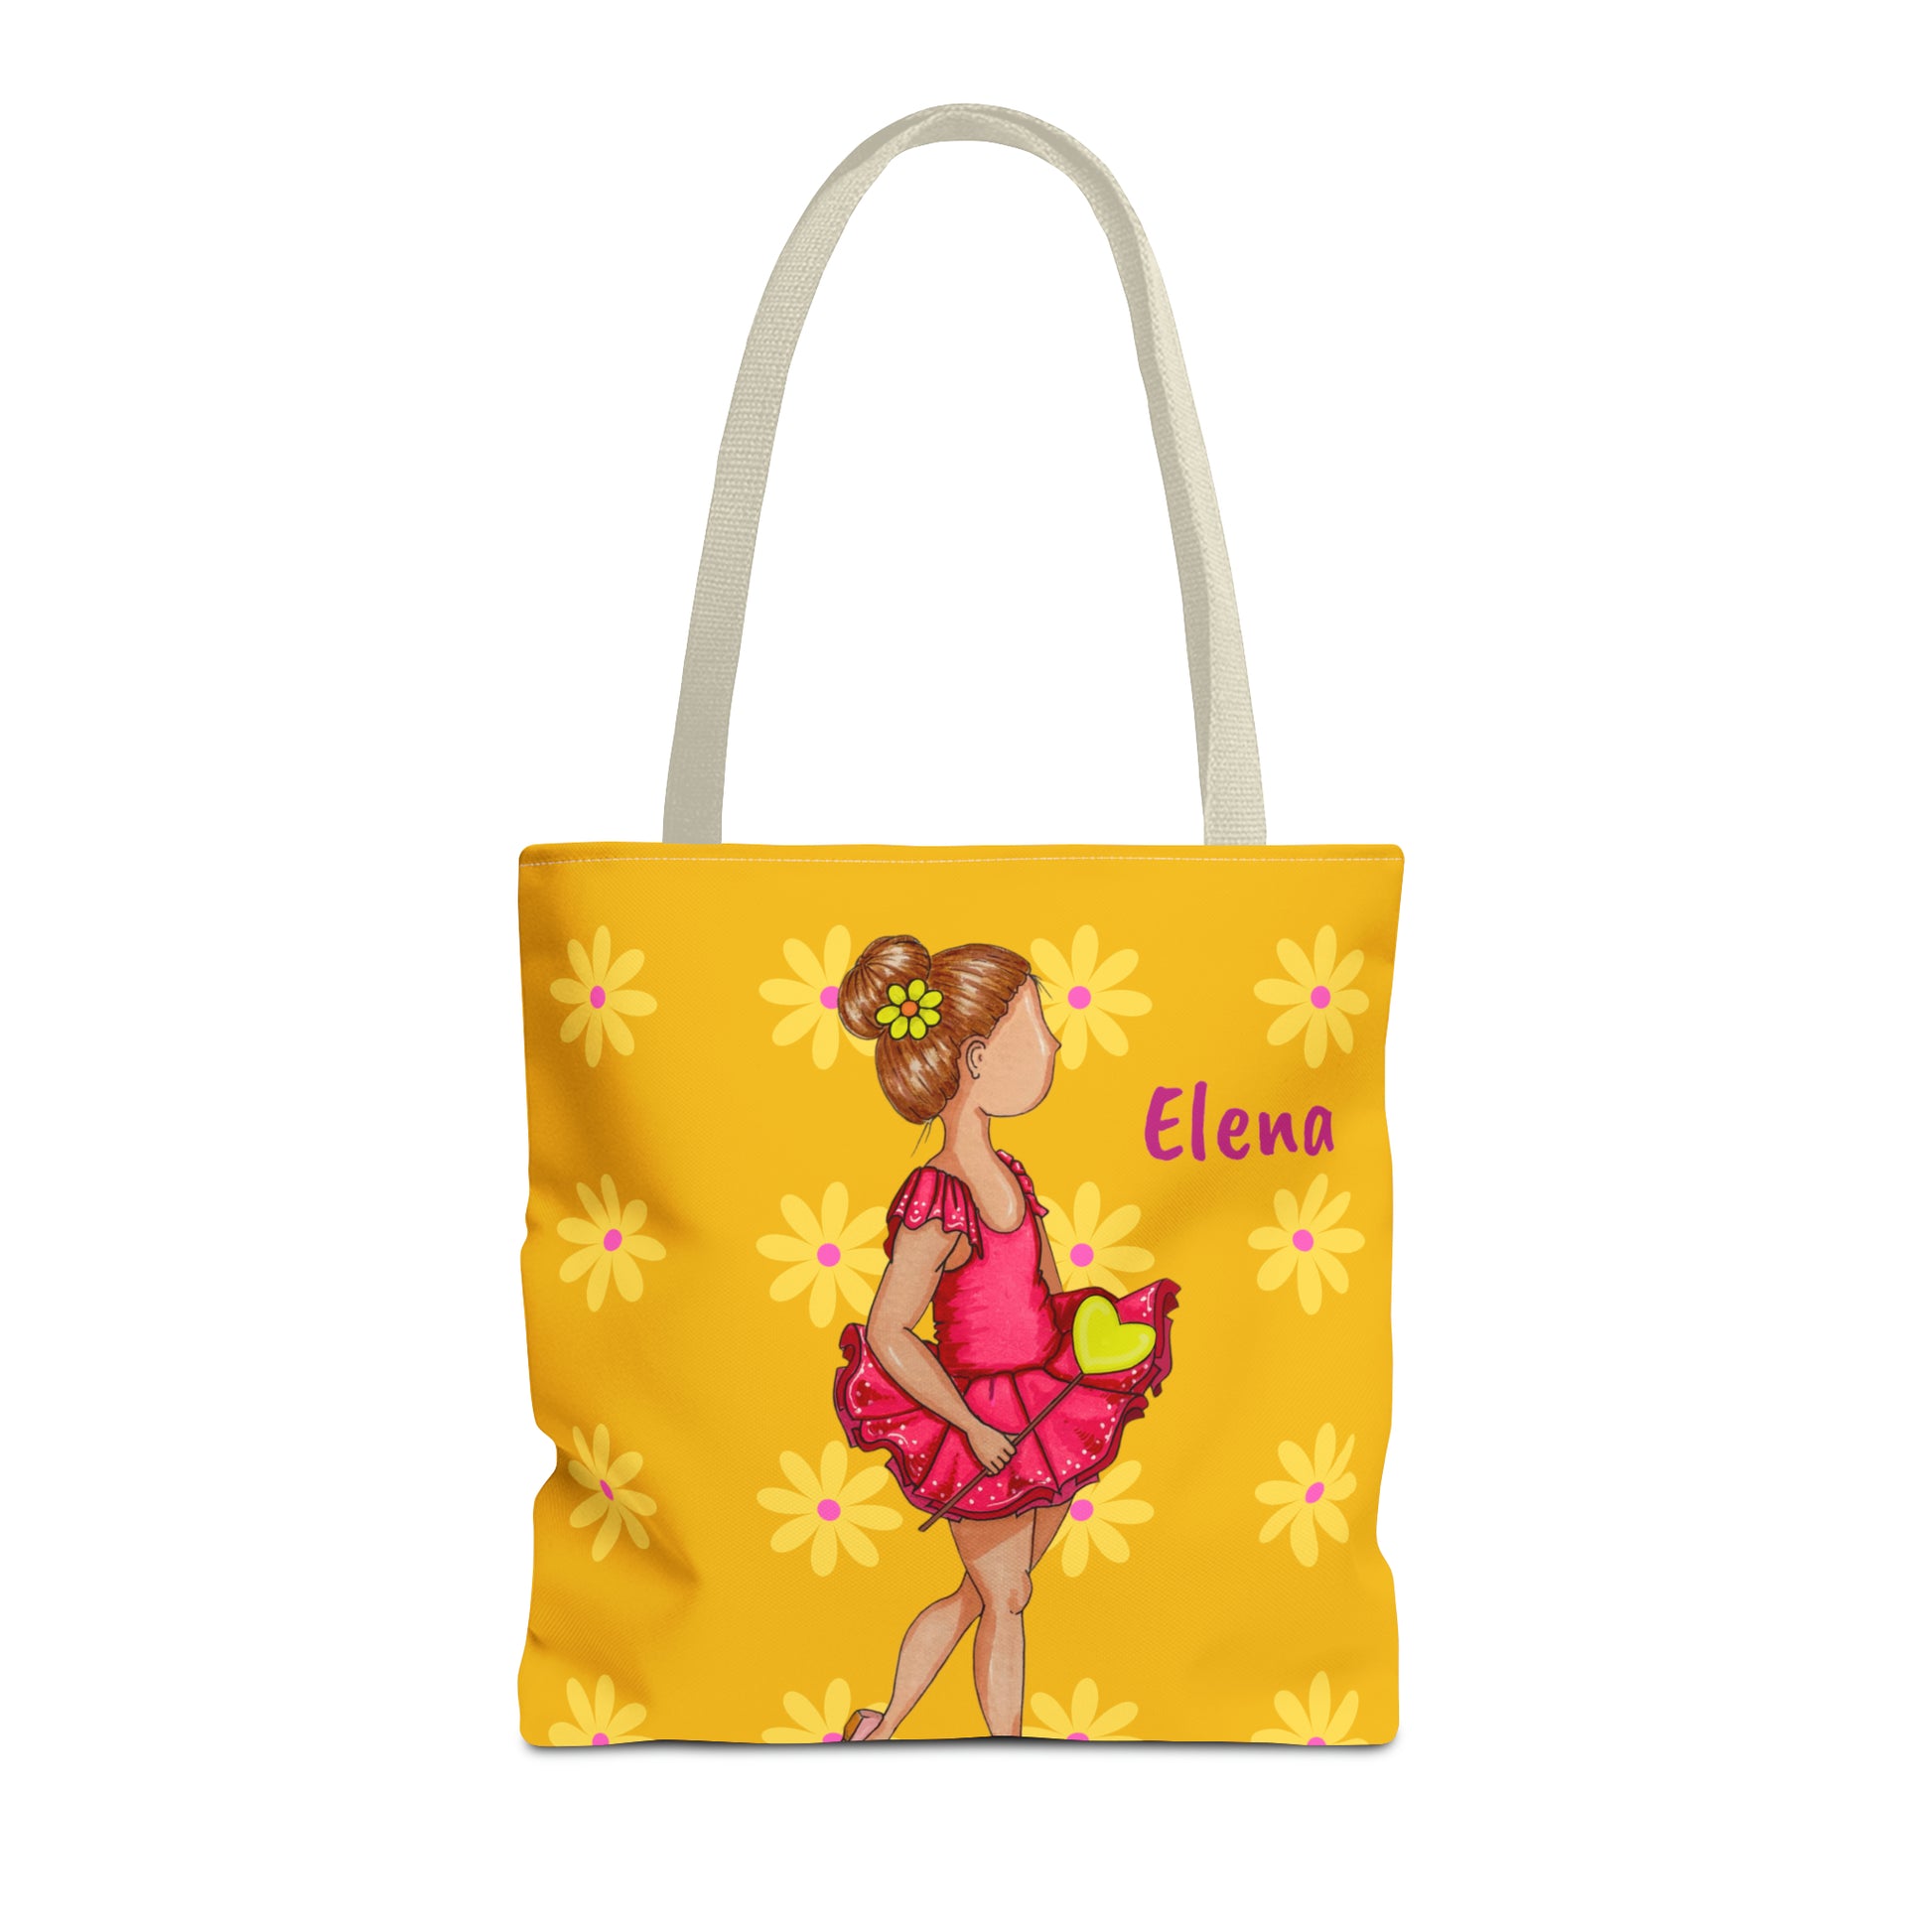 a yellow tote bag with a girl in a pink dress